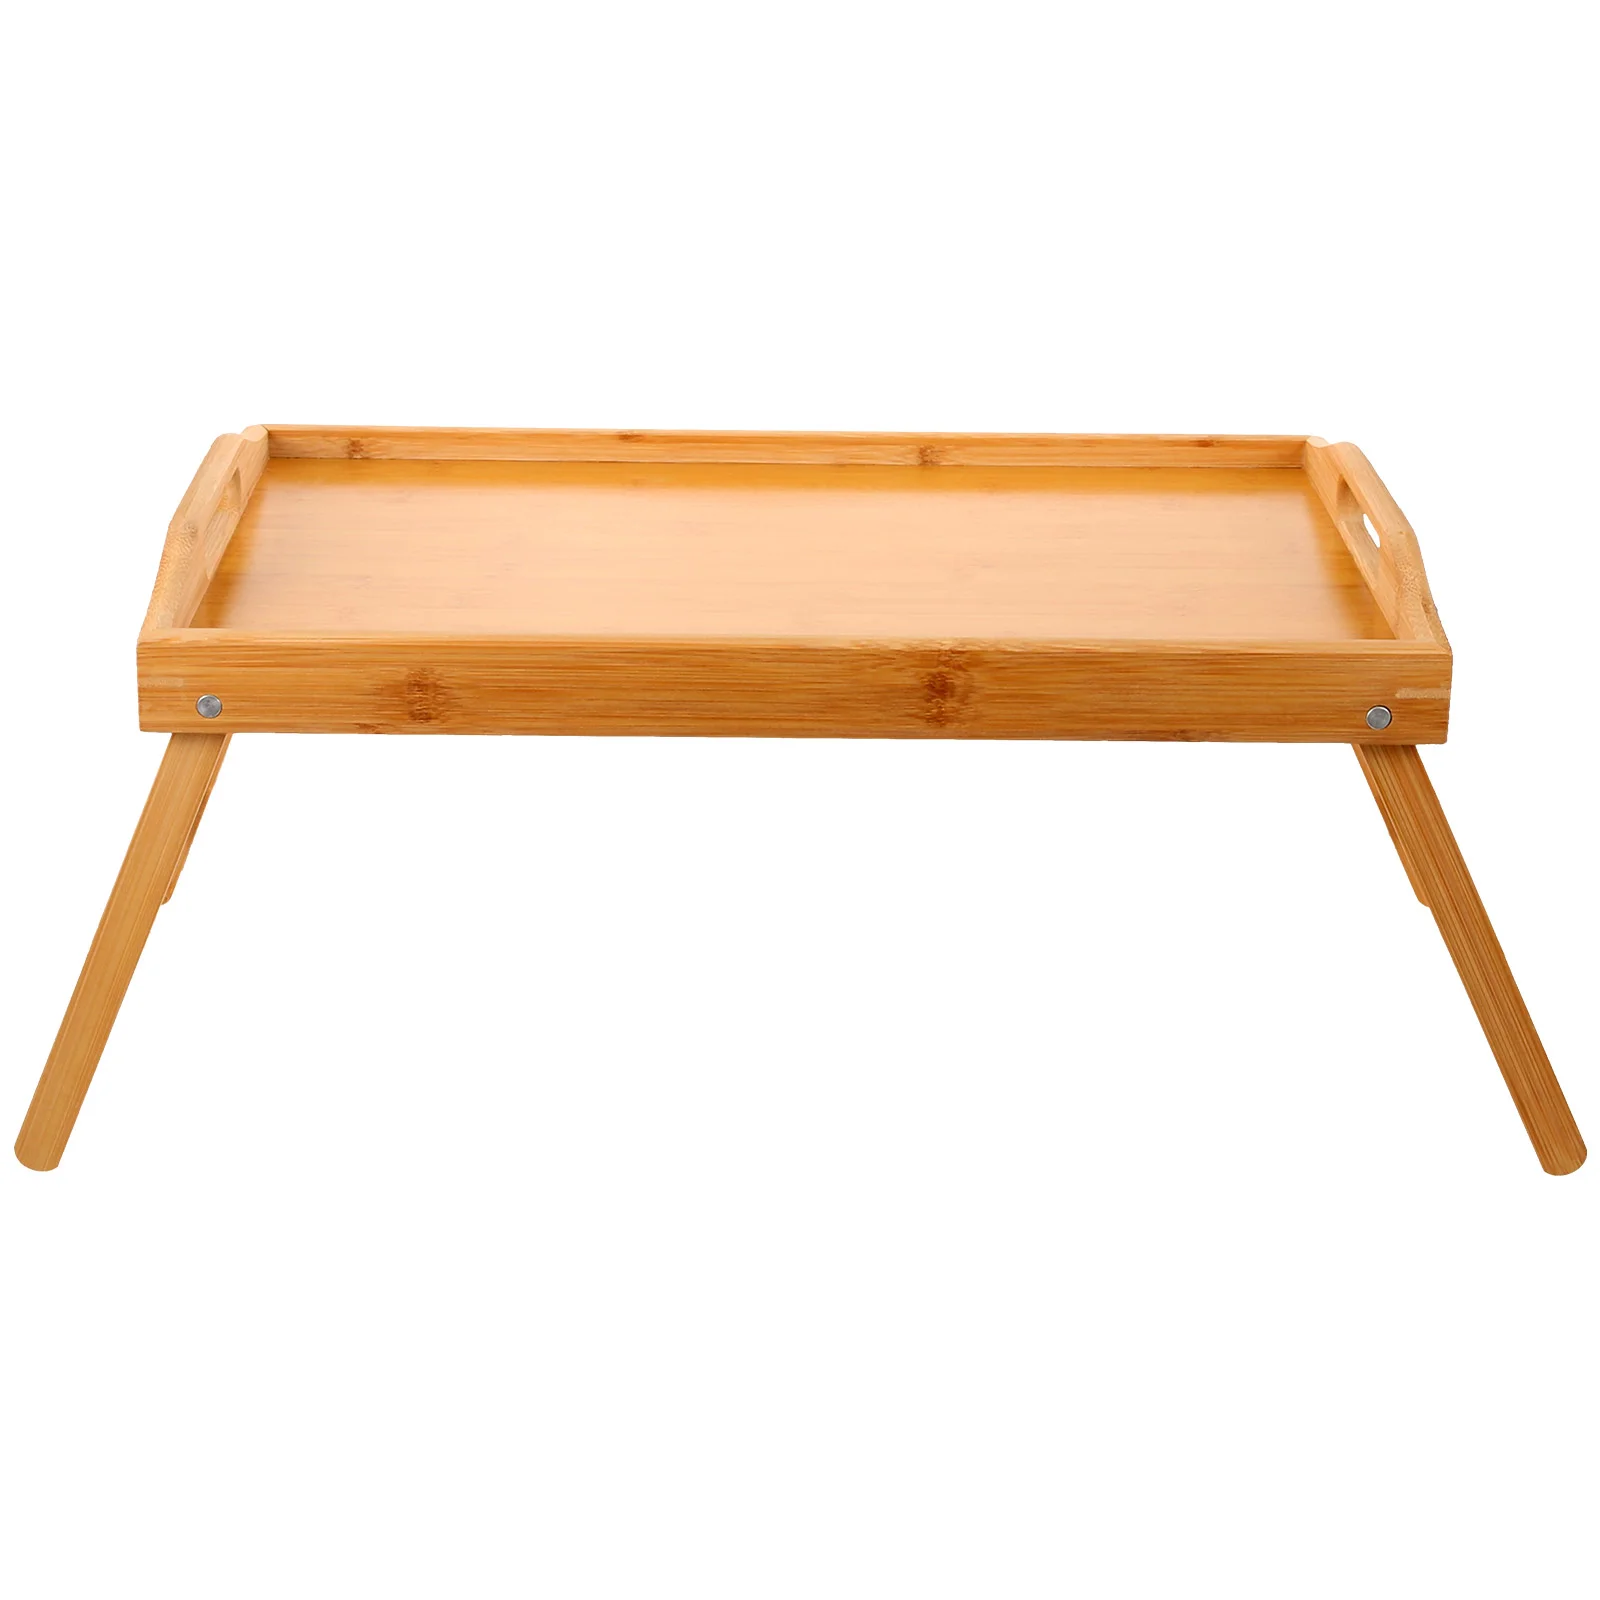 

Mini Wooden Table Rectangular Folding Bed Table Small Bed Desk Portable Side Table Breakfast Serving Tray Coffee Table Home